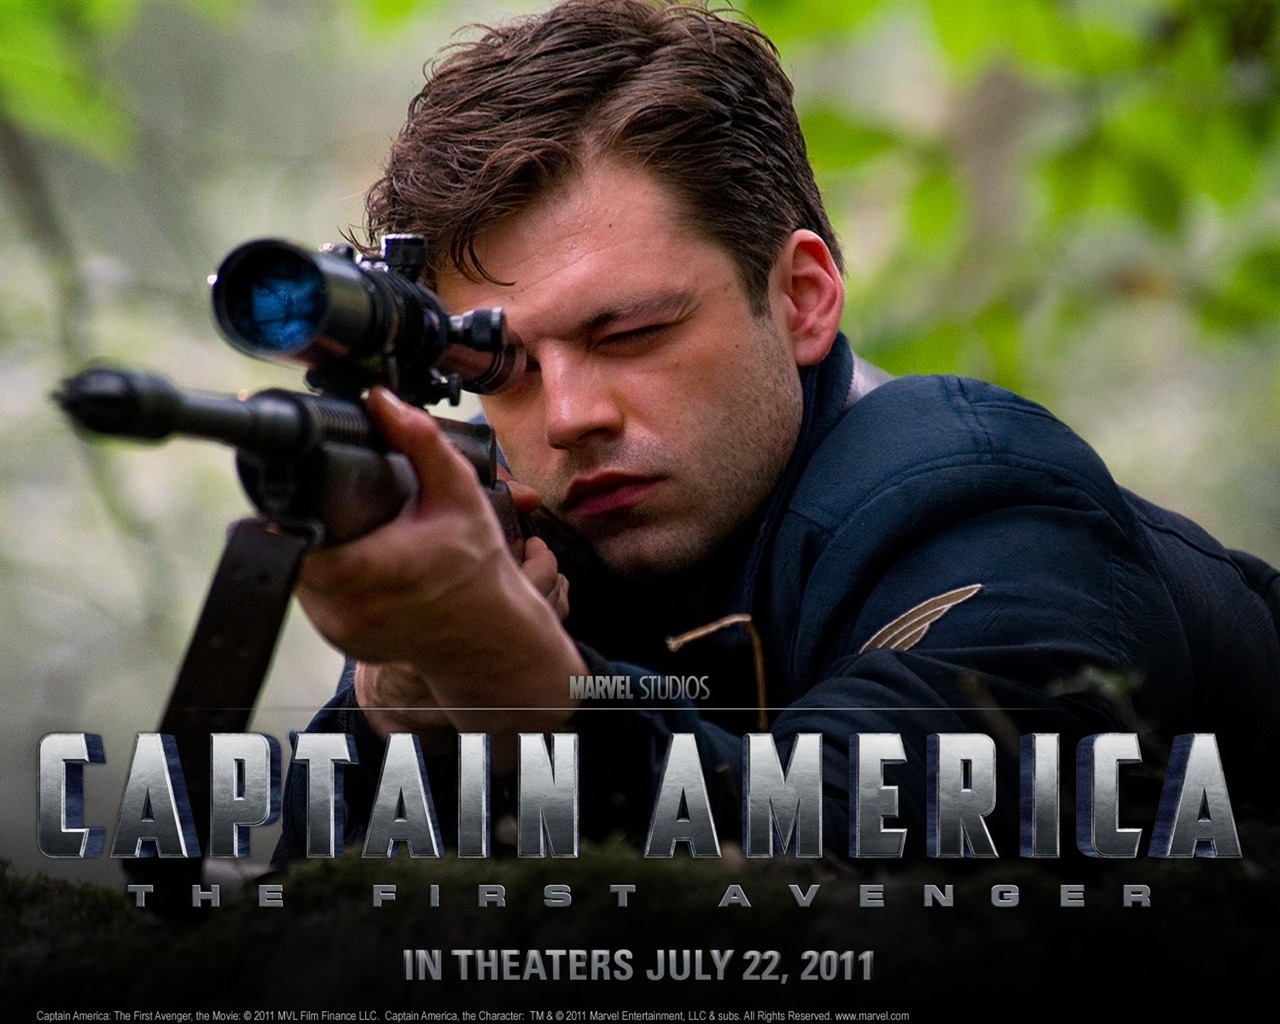 Captain America: The First Avenger wallpapers HD #18 - 1280x1024